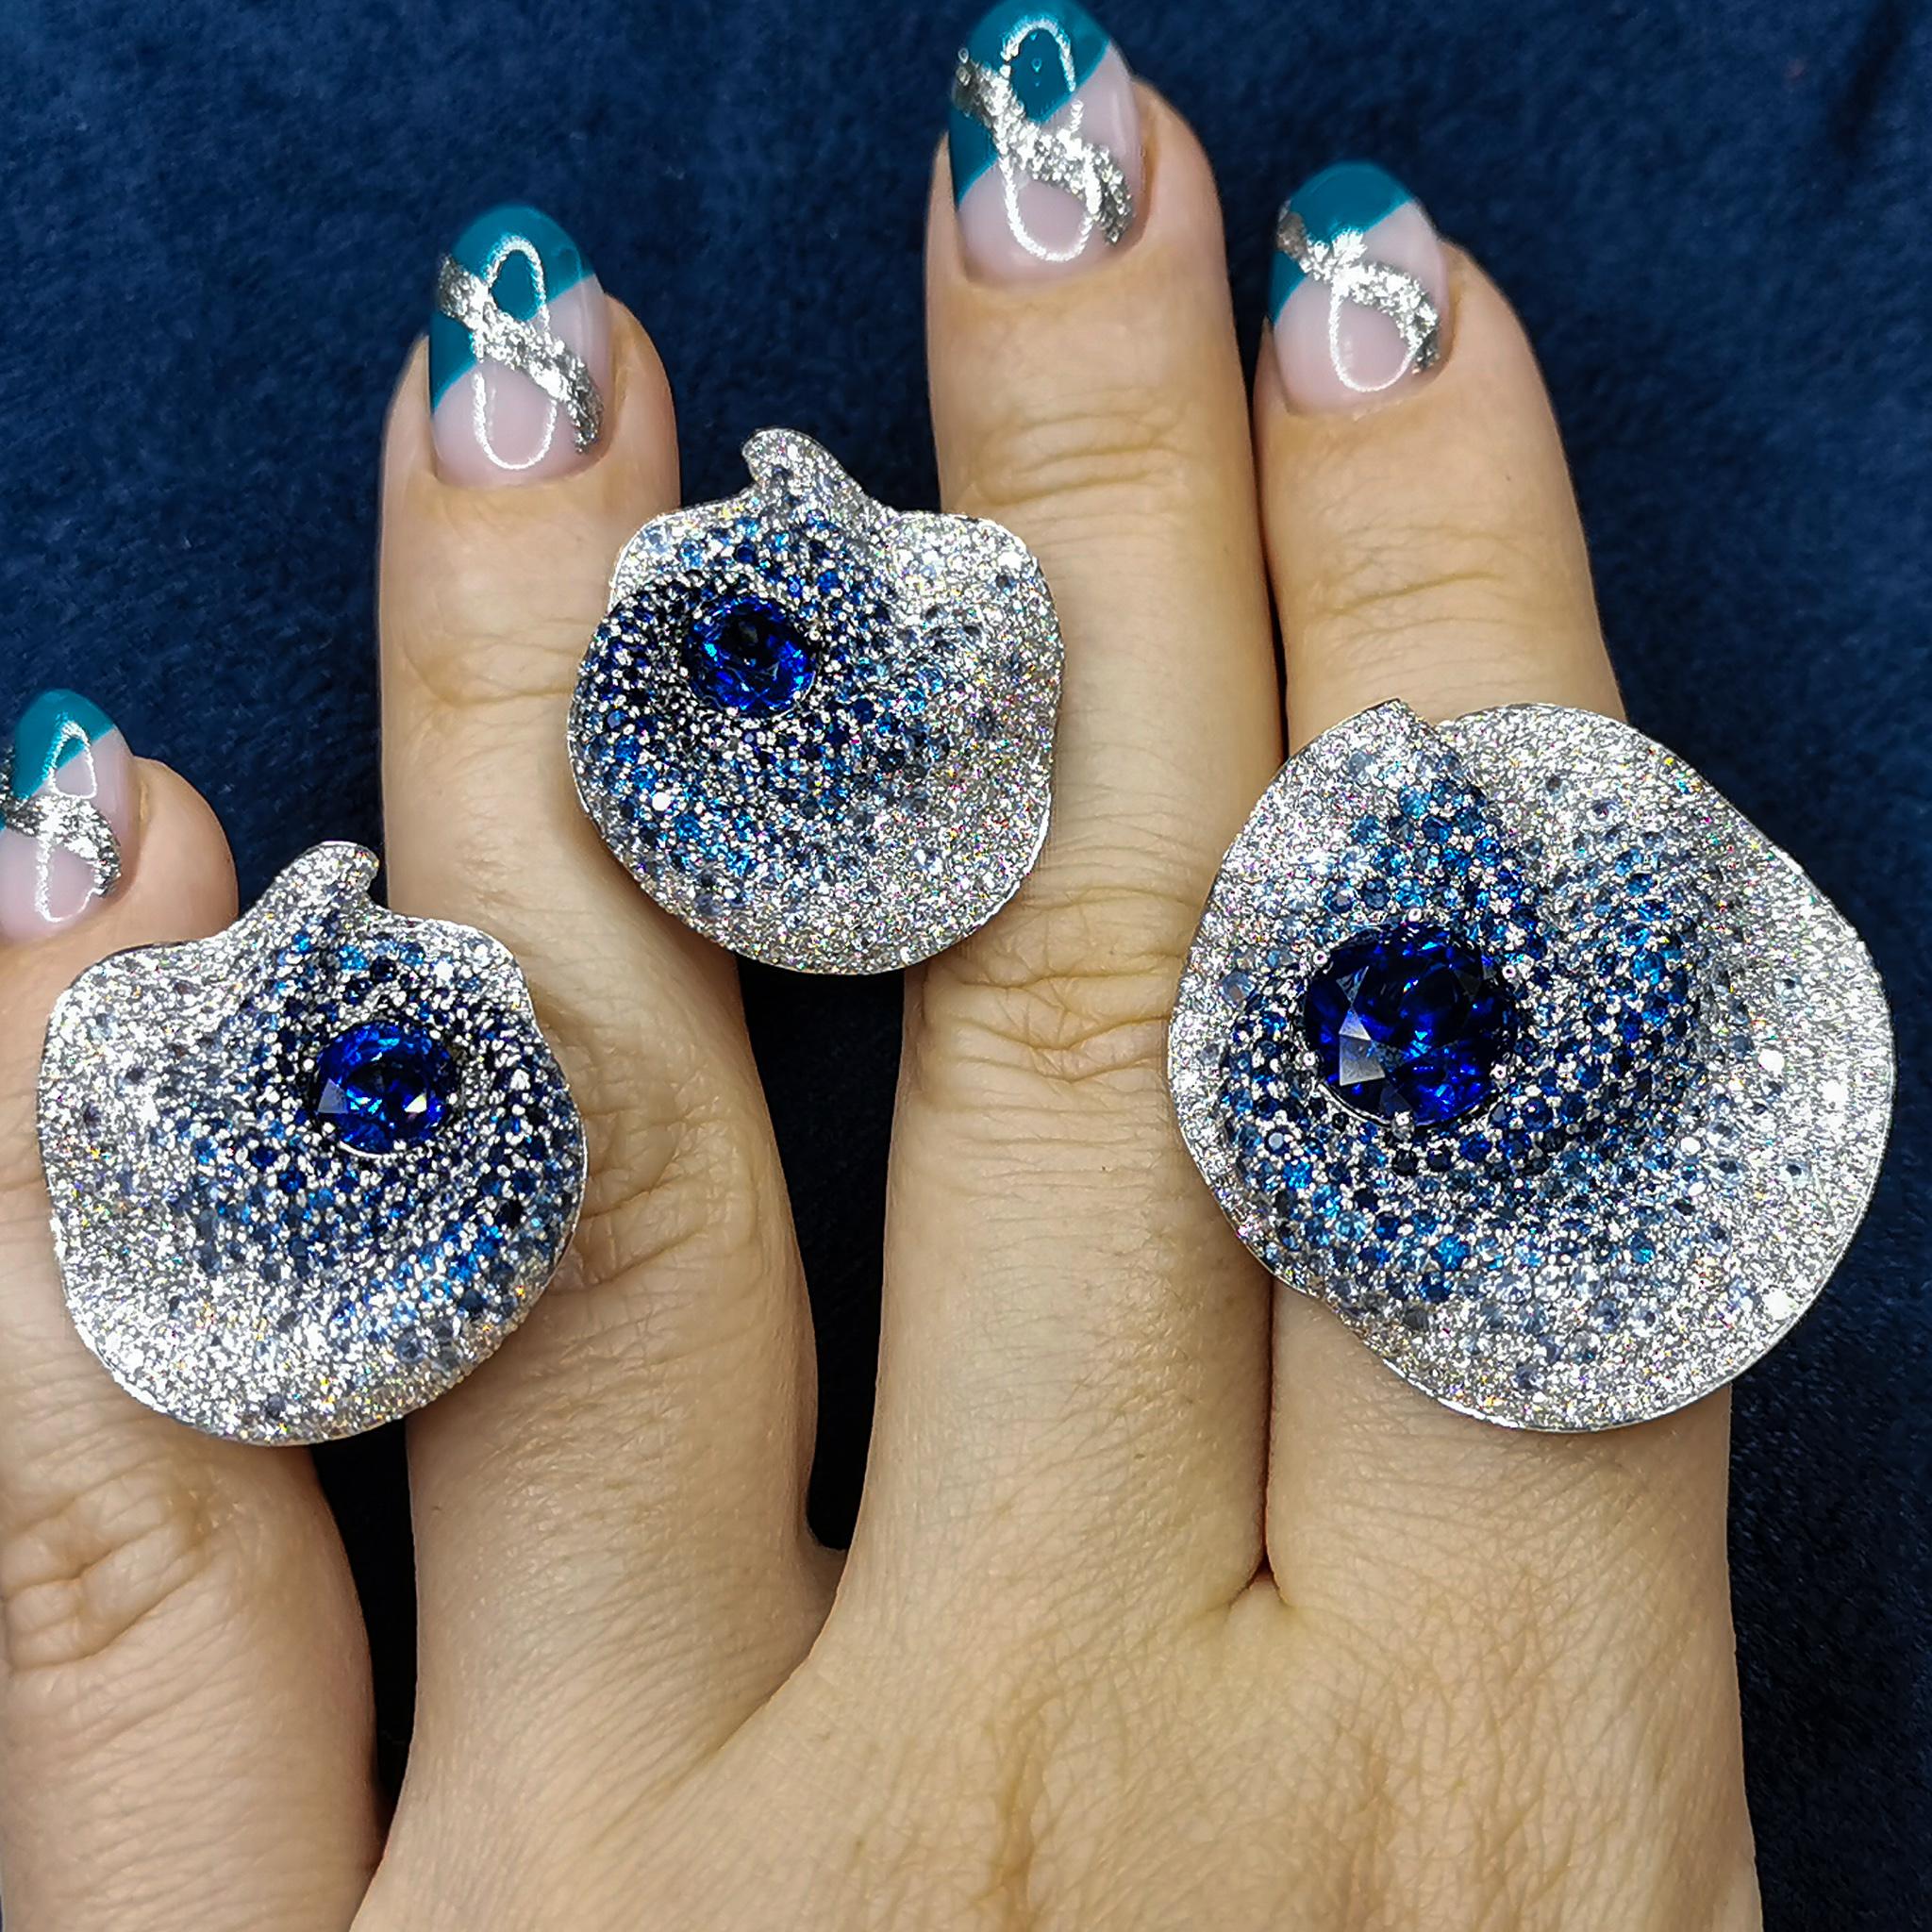 GRS Certified Blue Sapphires Diamonds 18 Karat White Gold Suite
Our new Suite from 